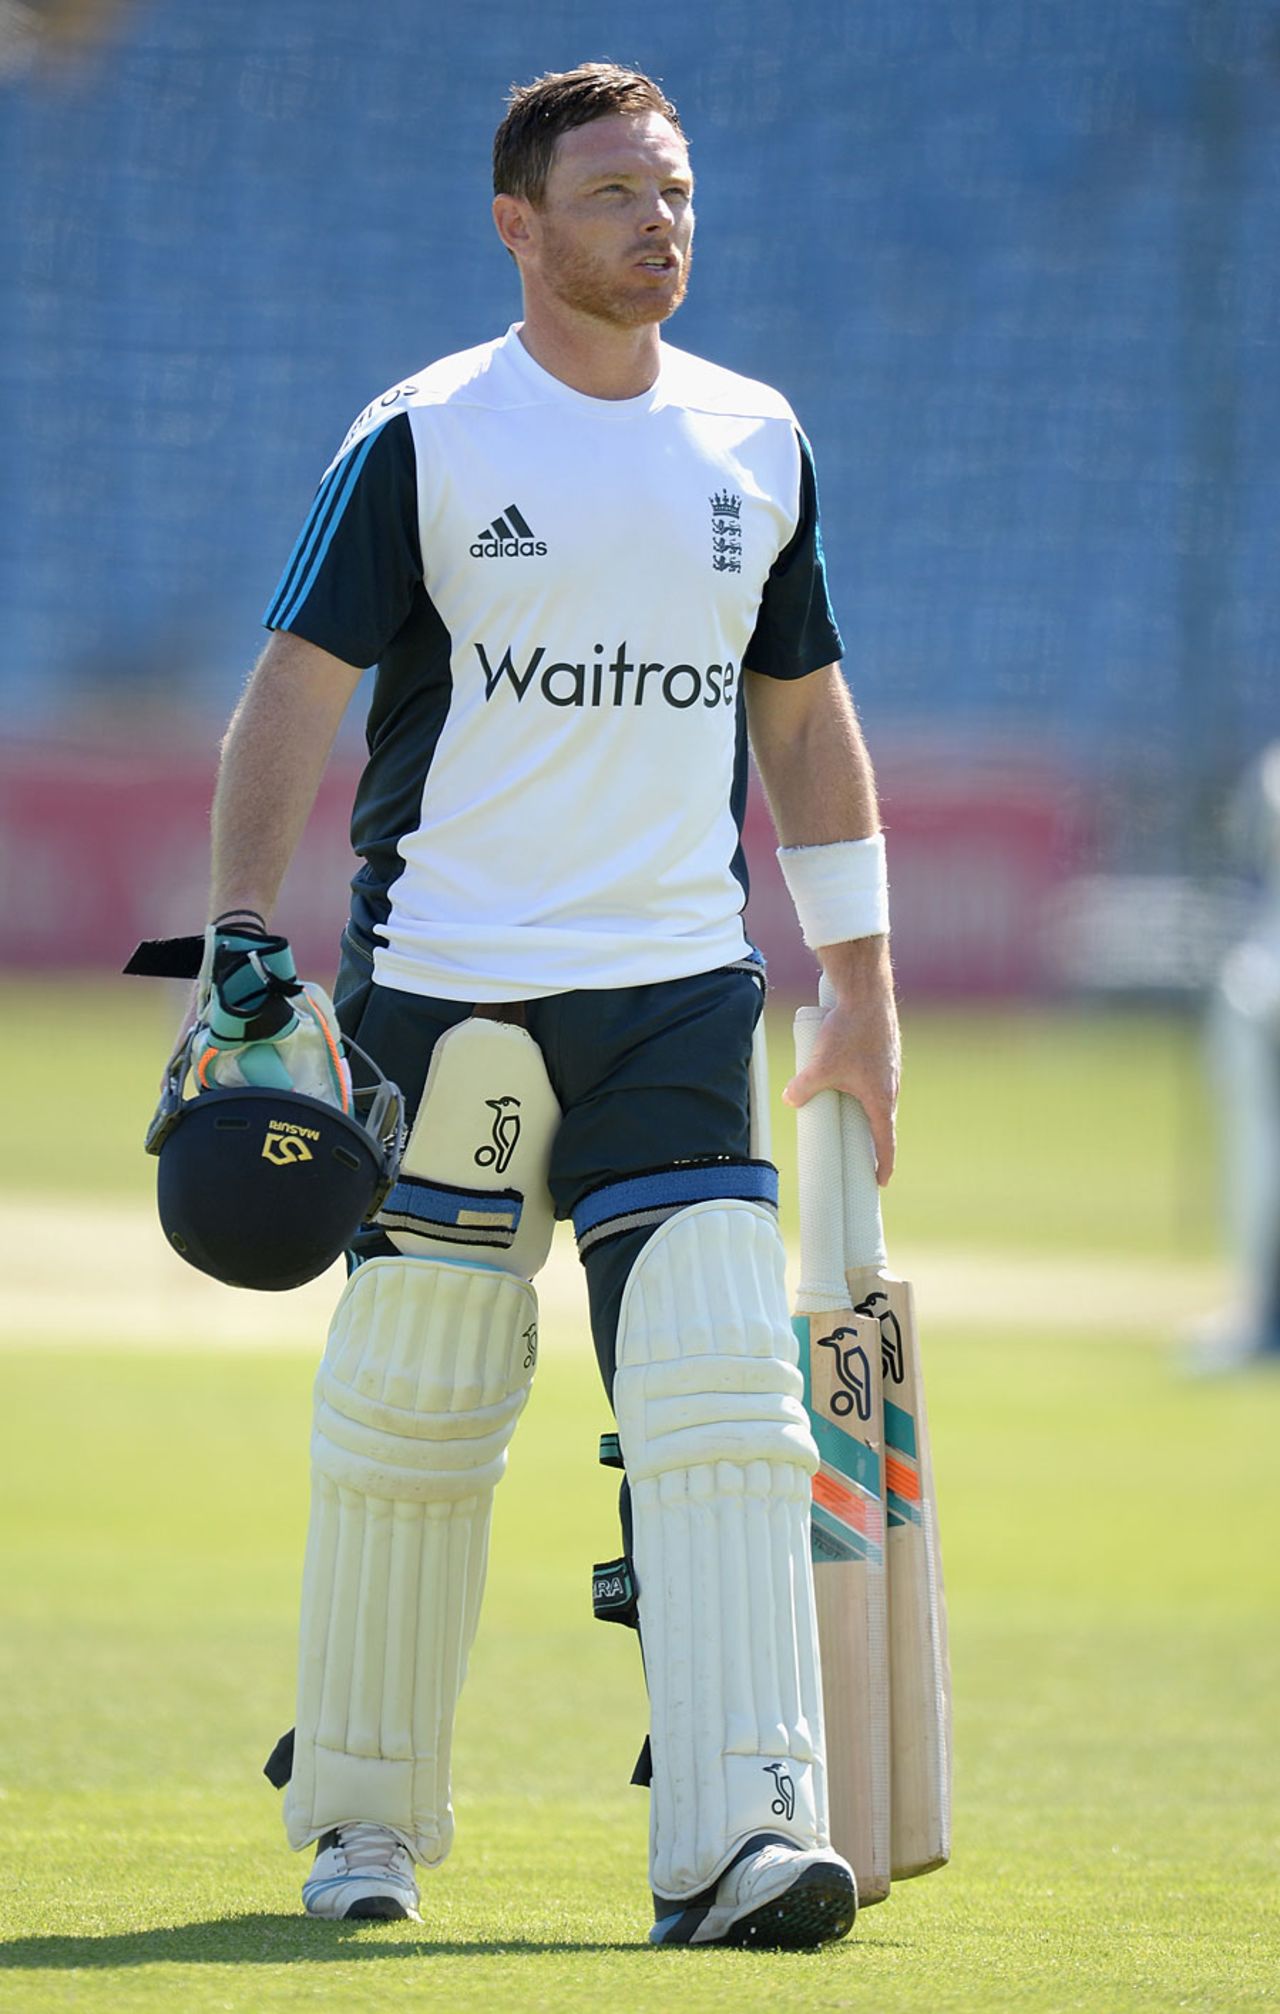 Ian Bell prepares for his 100th Test, Headingley, June 18, 2014